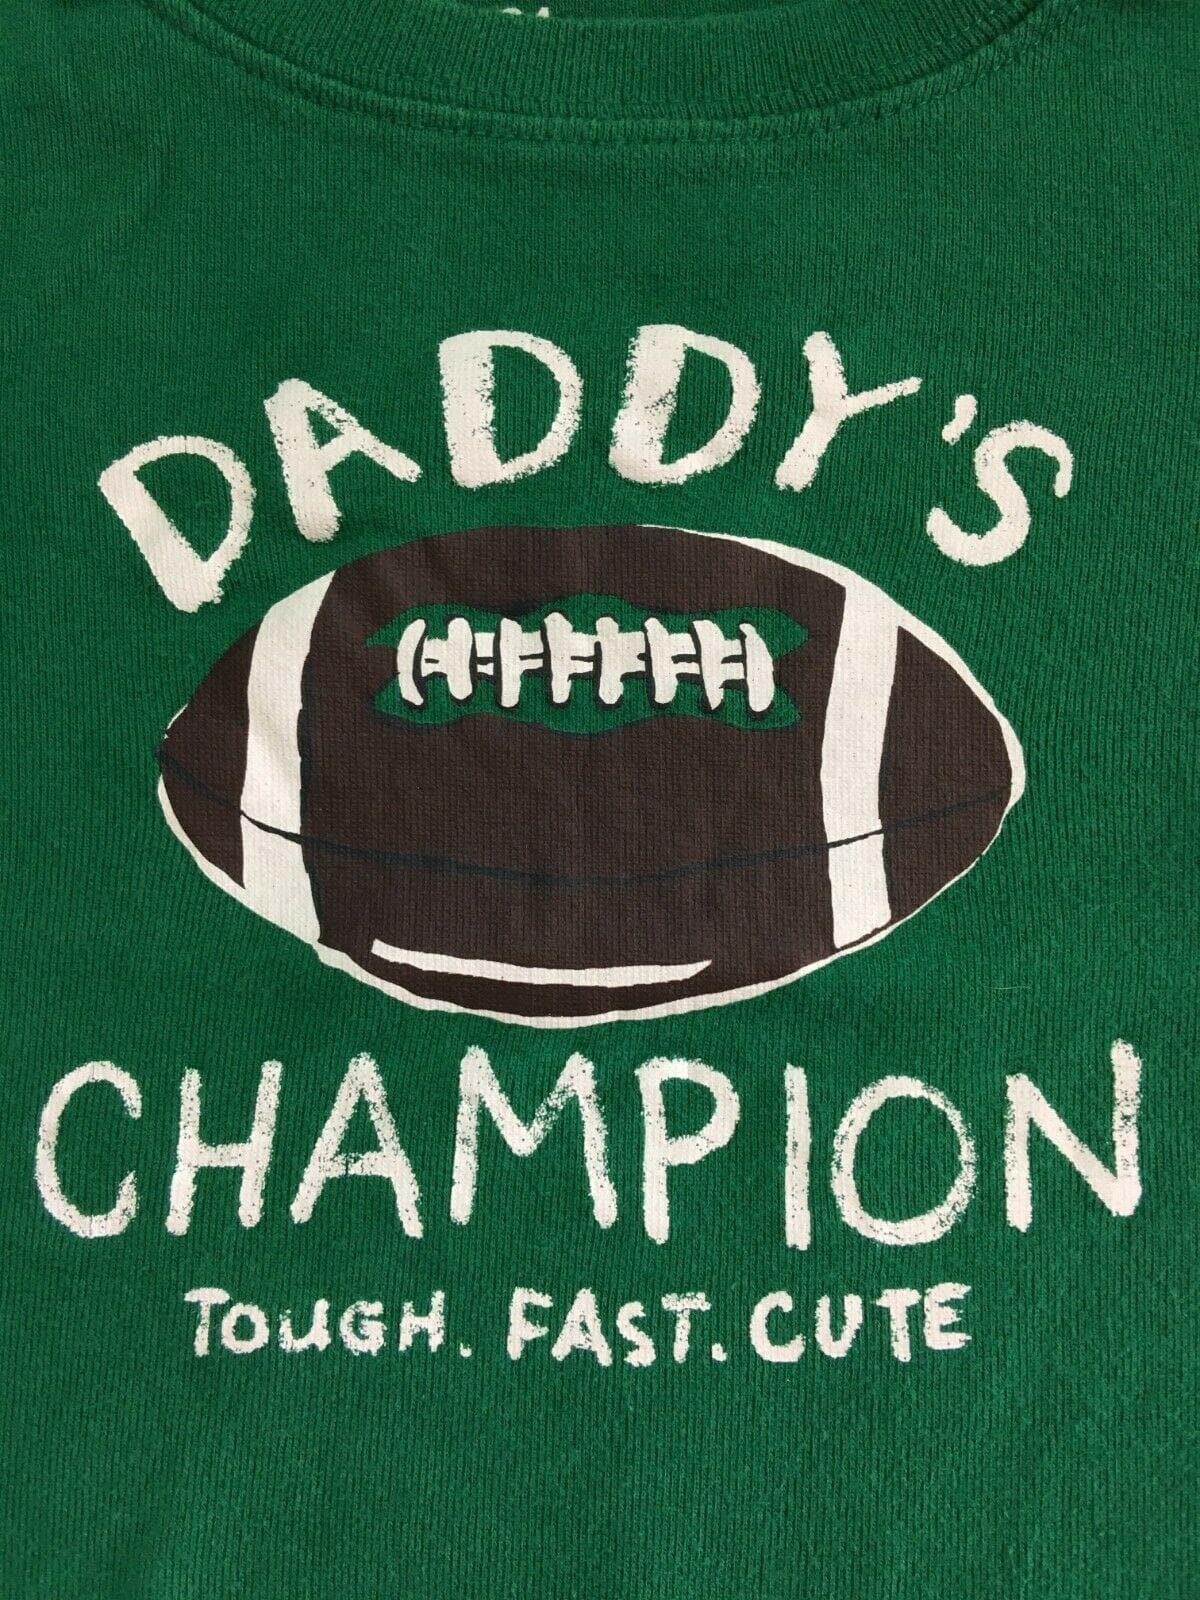 NFL NCAA American Football "Daddy's Champion" L/S T-Shirt Toddler 24 Months